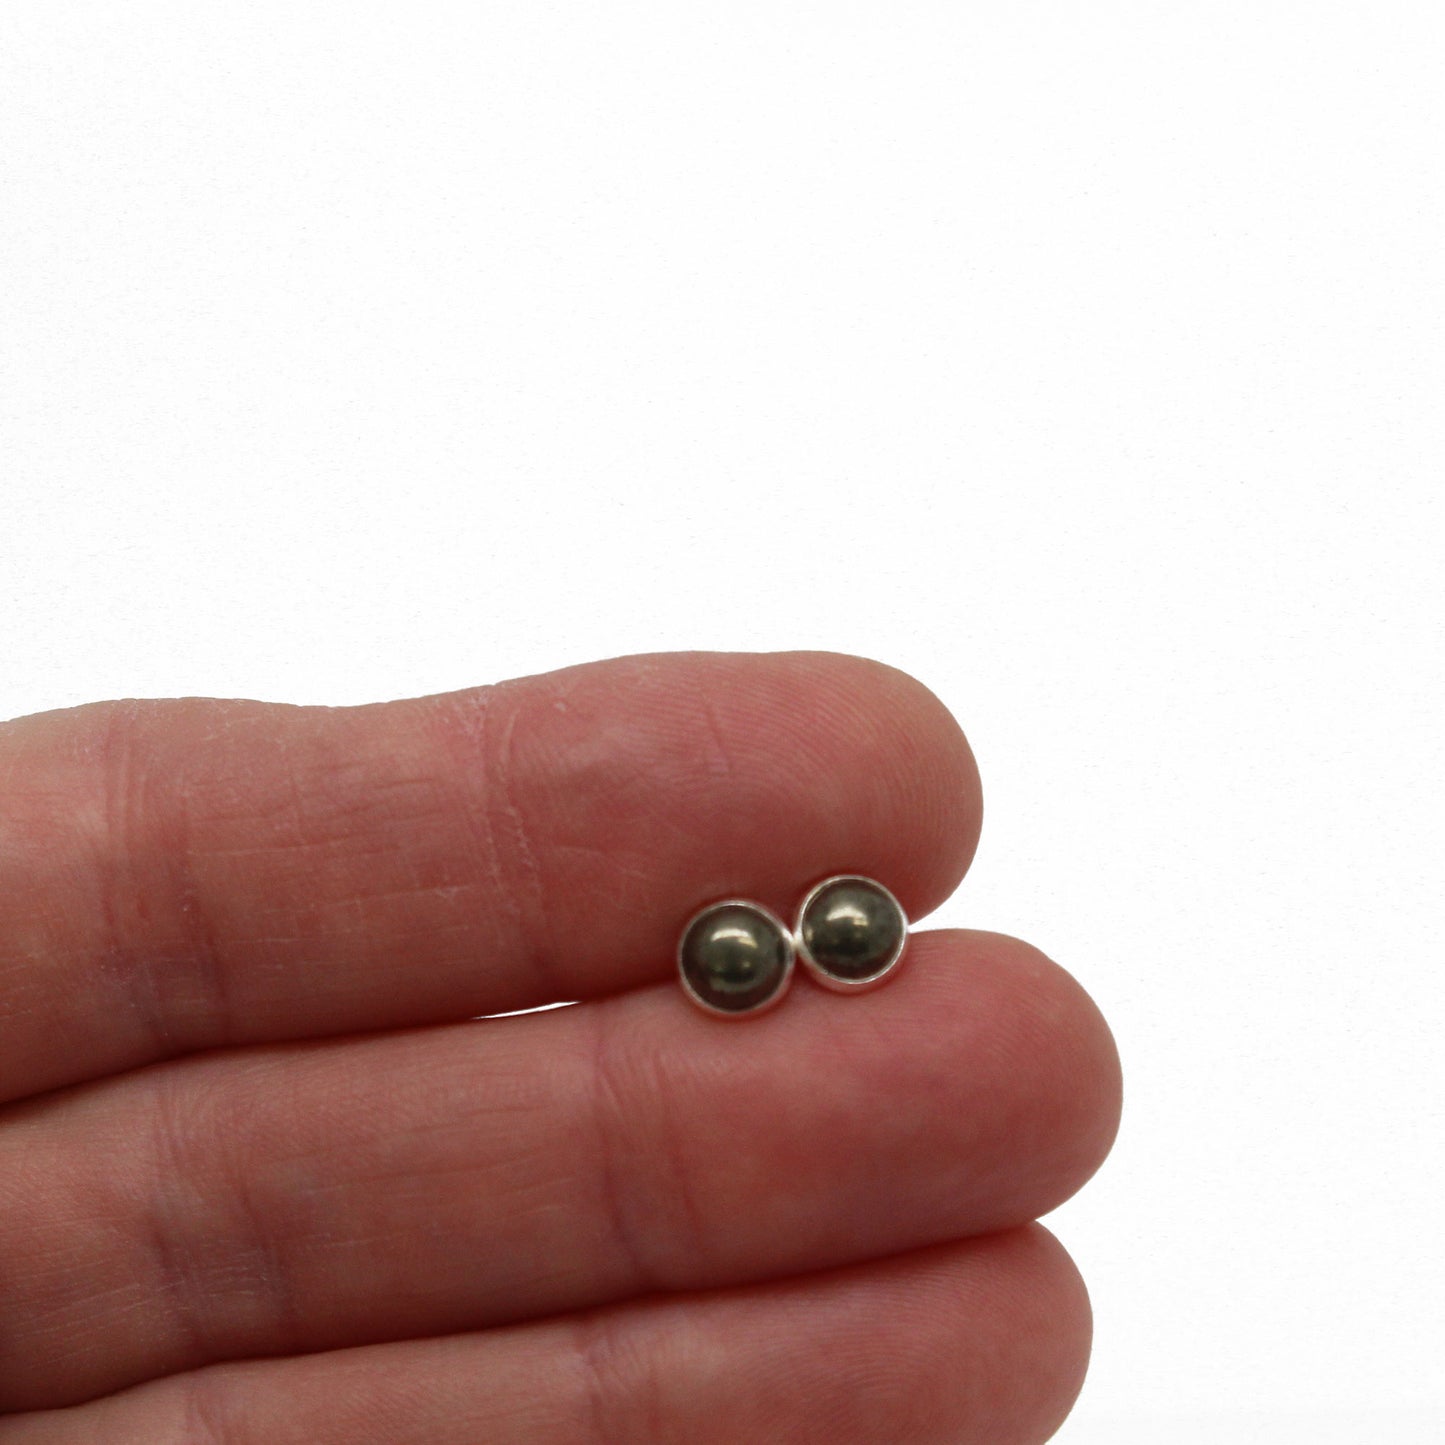 Handmade Pyrite Stud Earrings in 925 Sterling Silver or Gold Fill